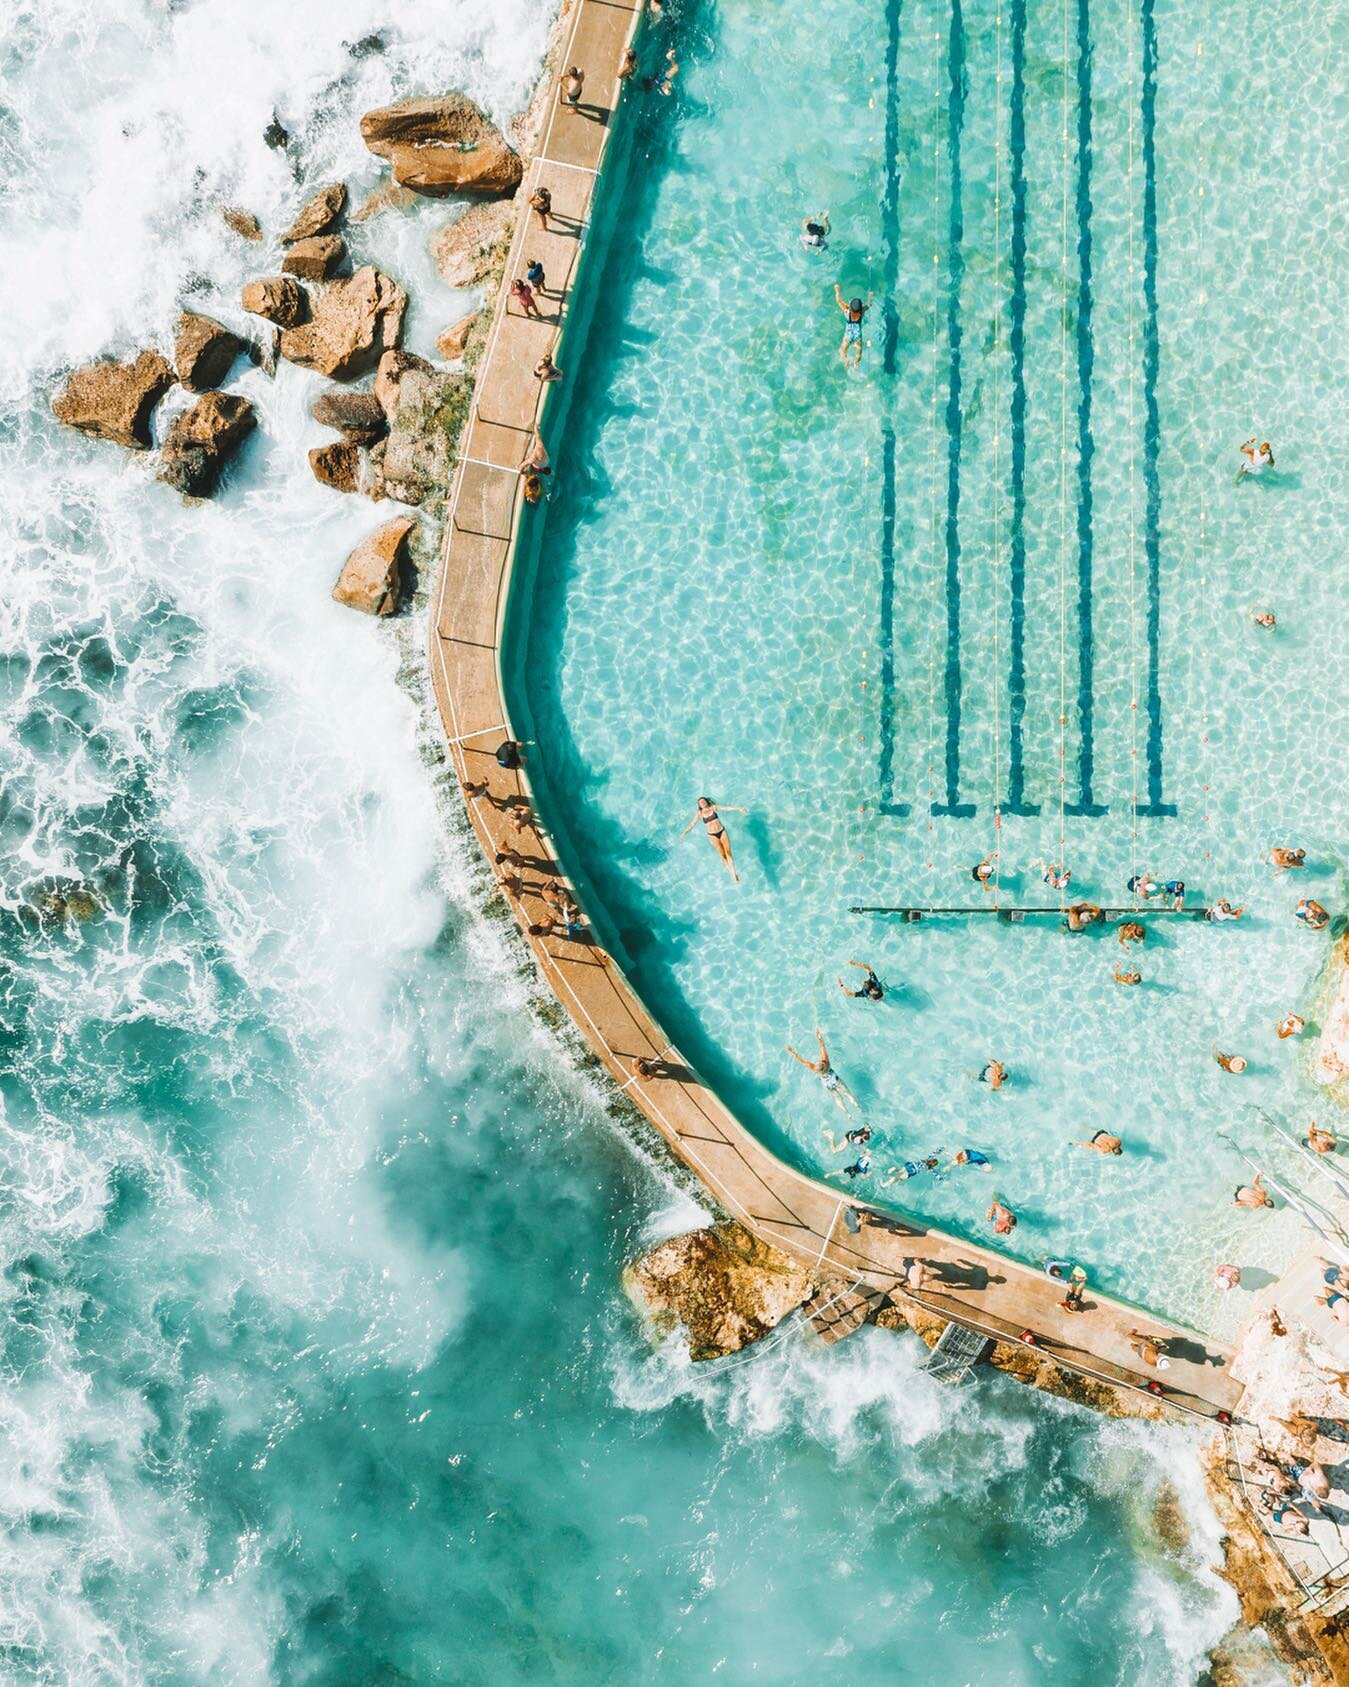 The lady in the middle of this shot definitely knows how to relax! ☀️
.
.
.
#brontebeach #bronte #brontebaths #brontepool #topdowntuesday #aerialphotography #aerial #beachvibes #sydney #australia #seeaustralia #freewell #holidayherethisyear #dronepho